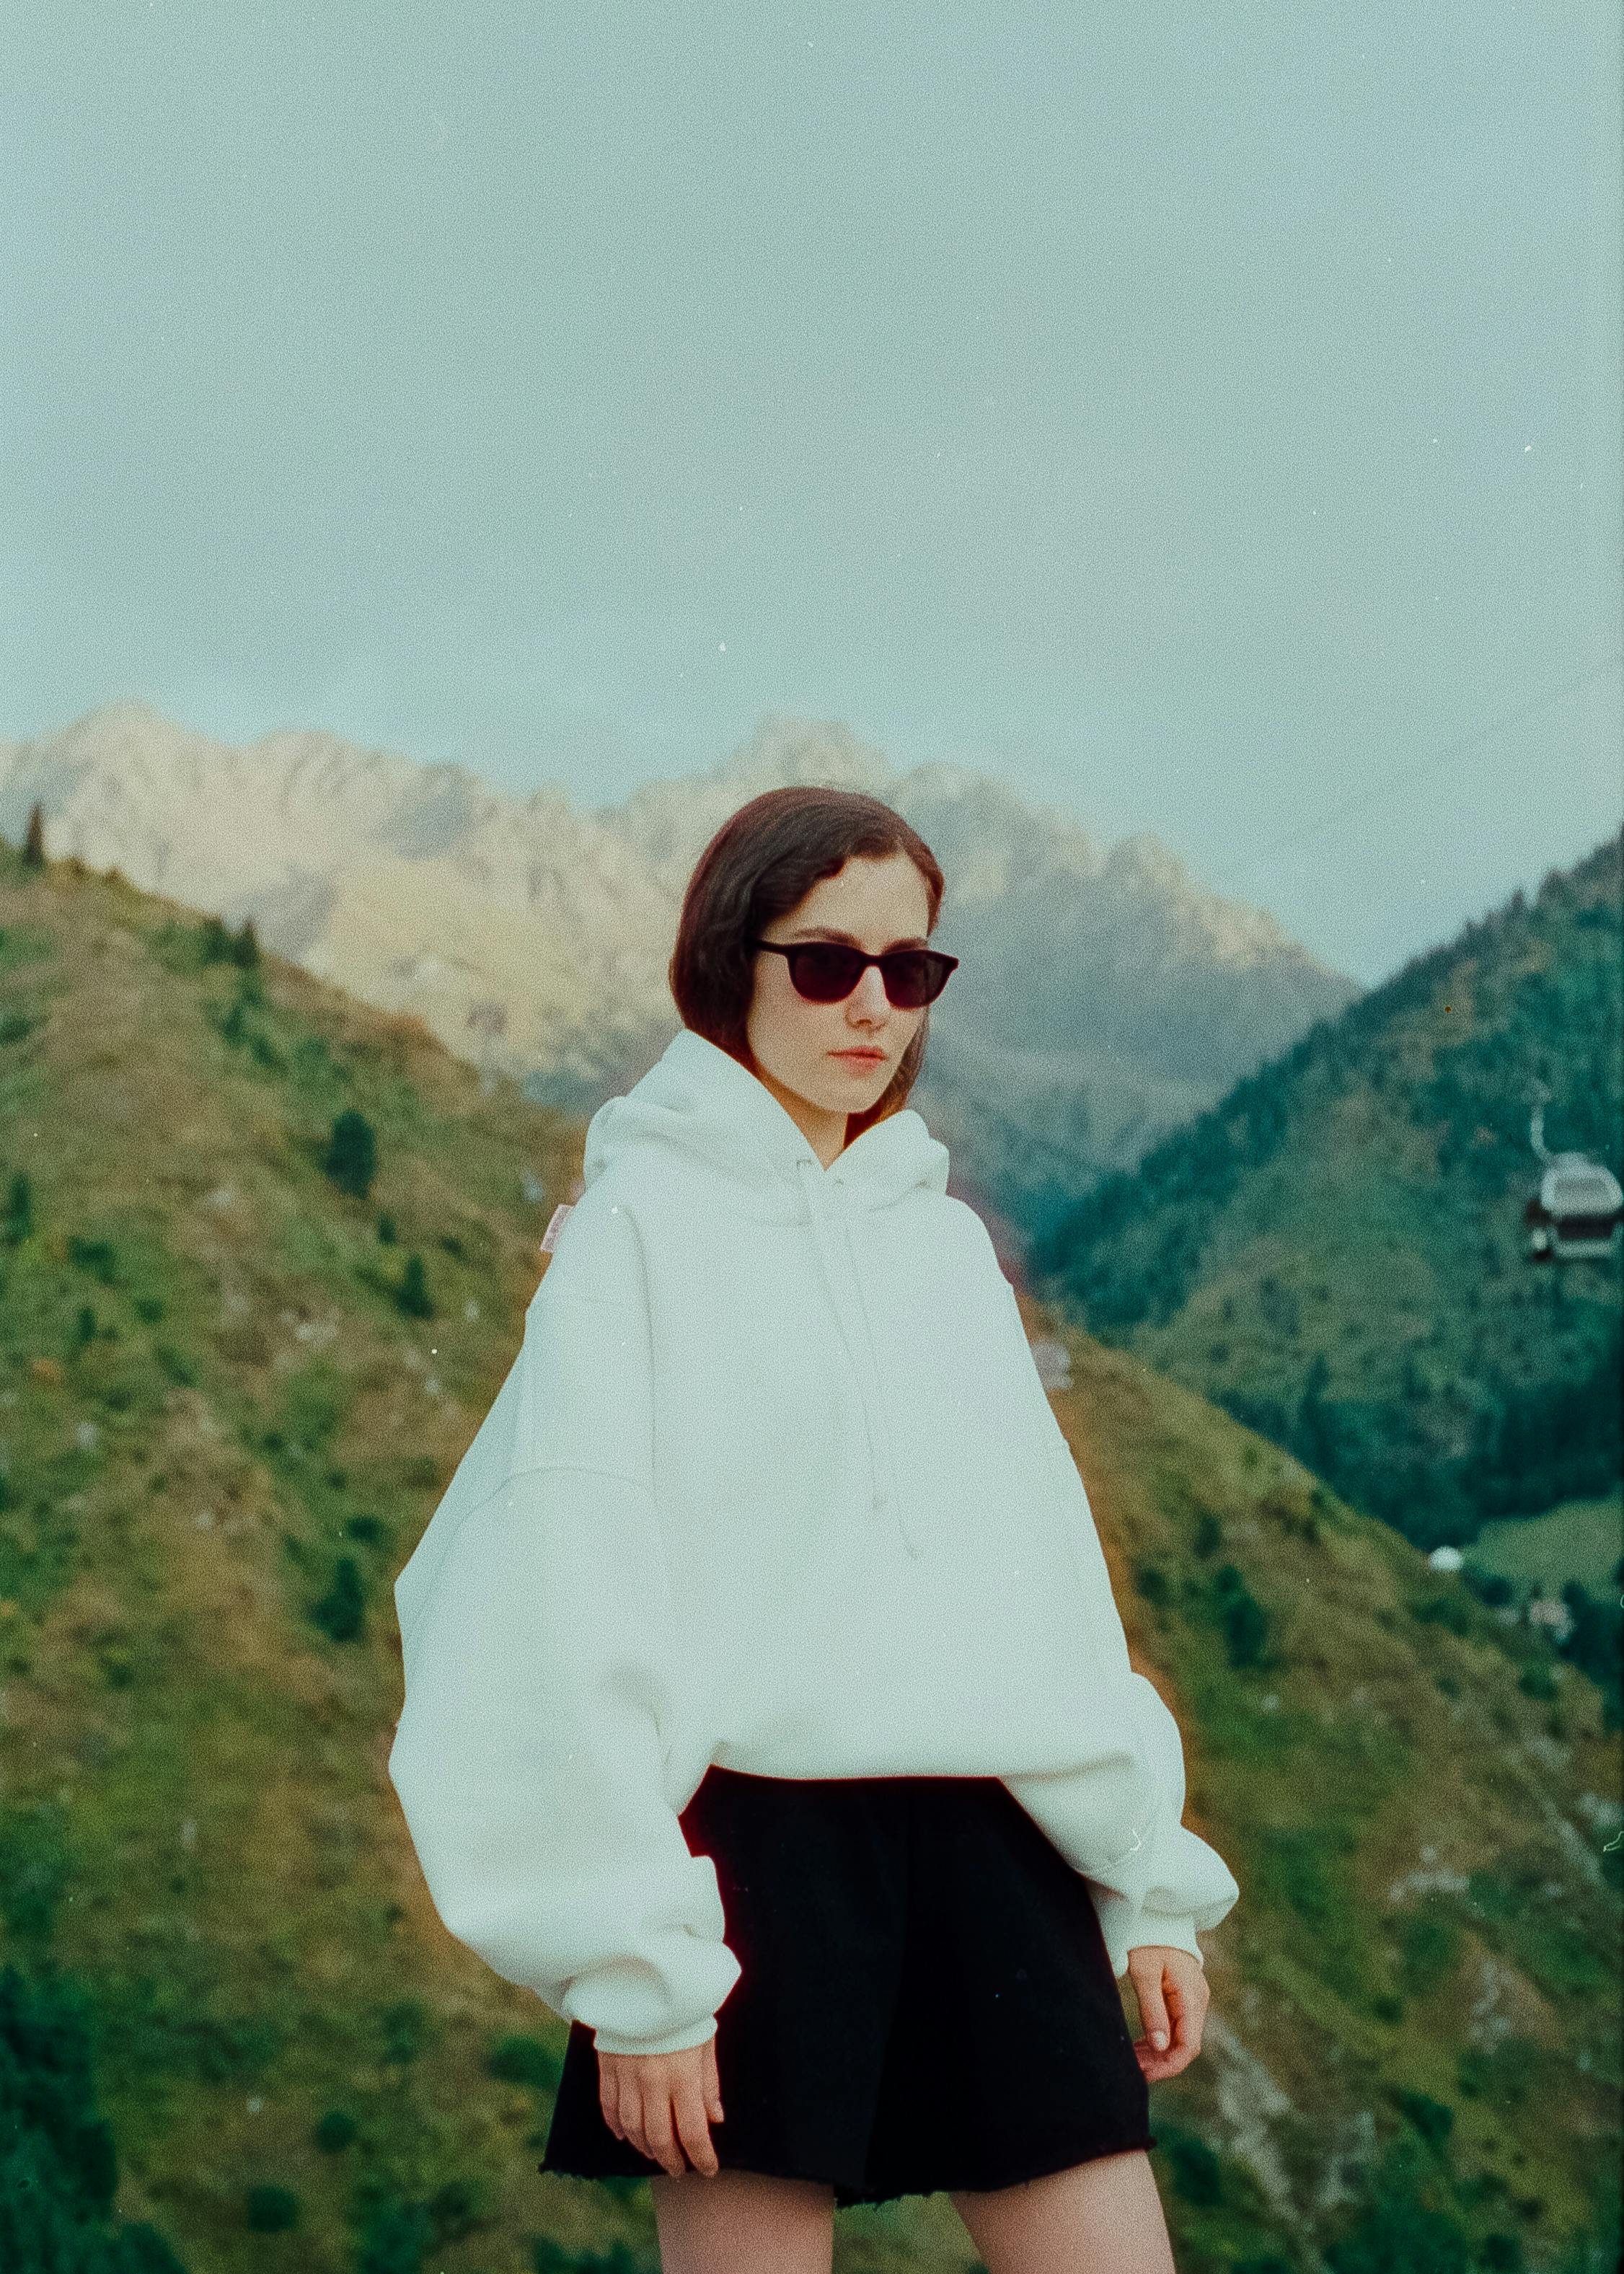 teenage girl wearing short skirt and blouse in mountains